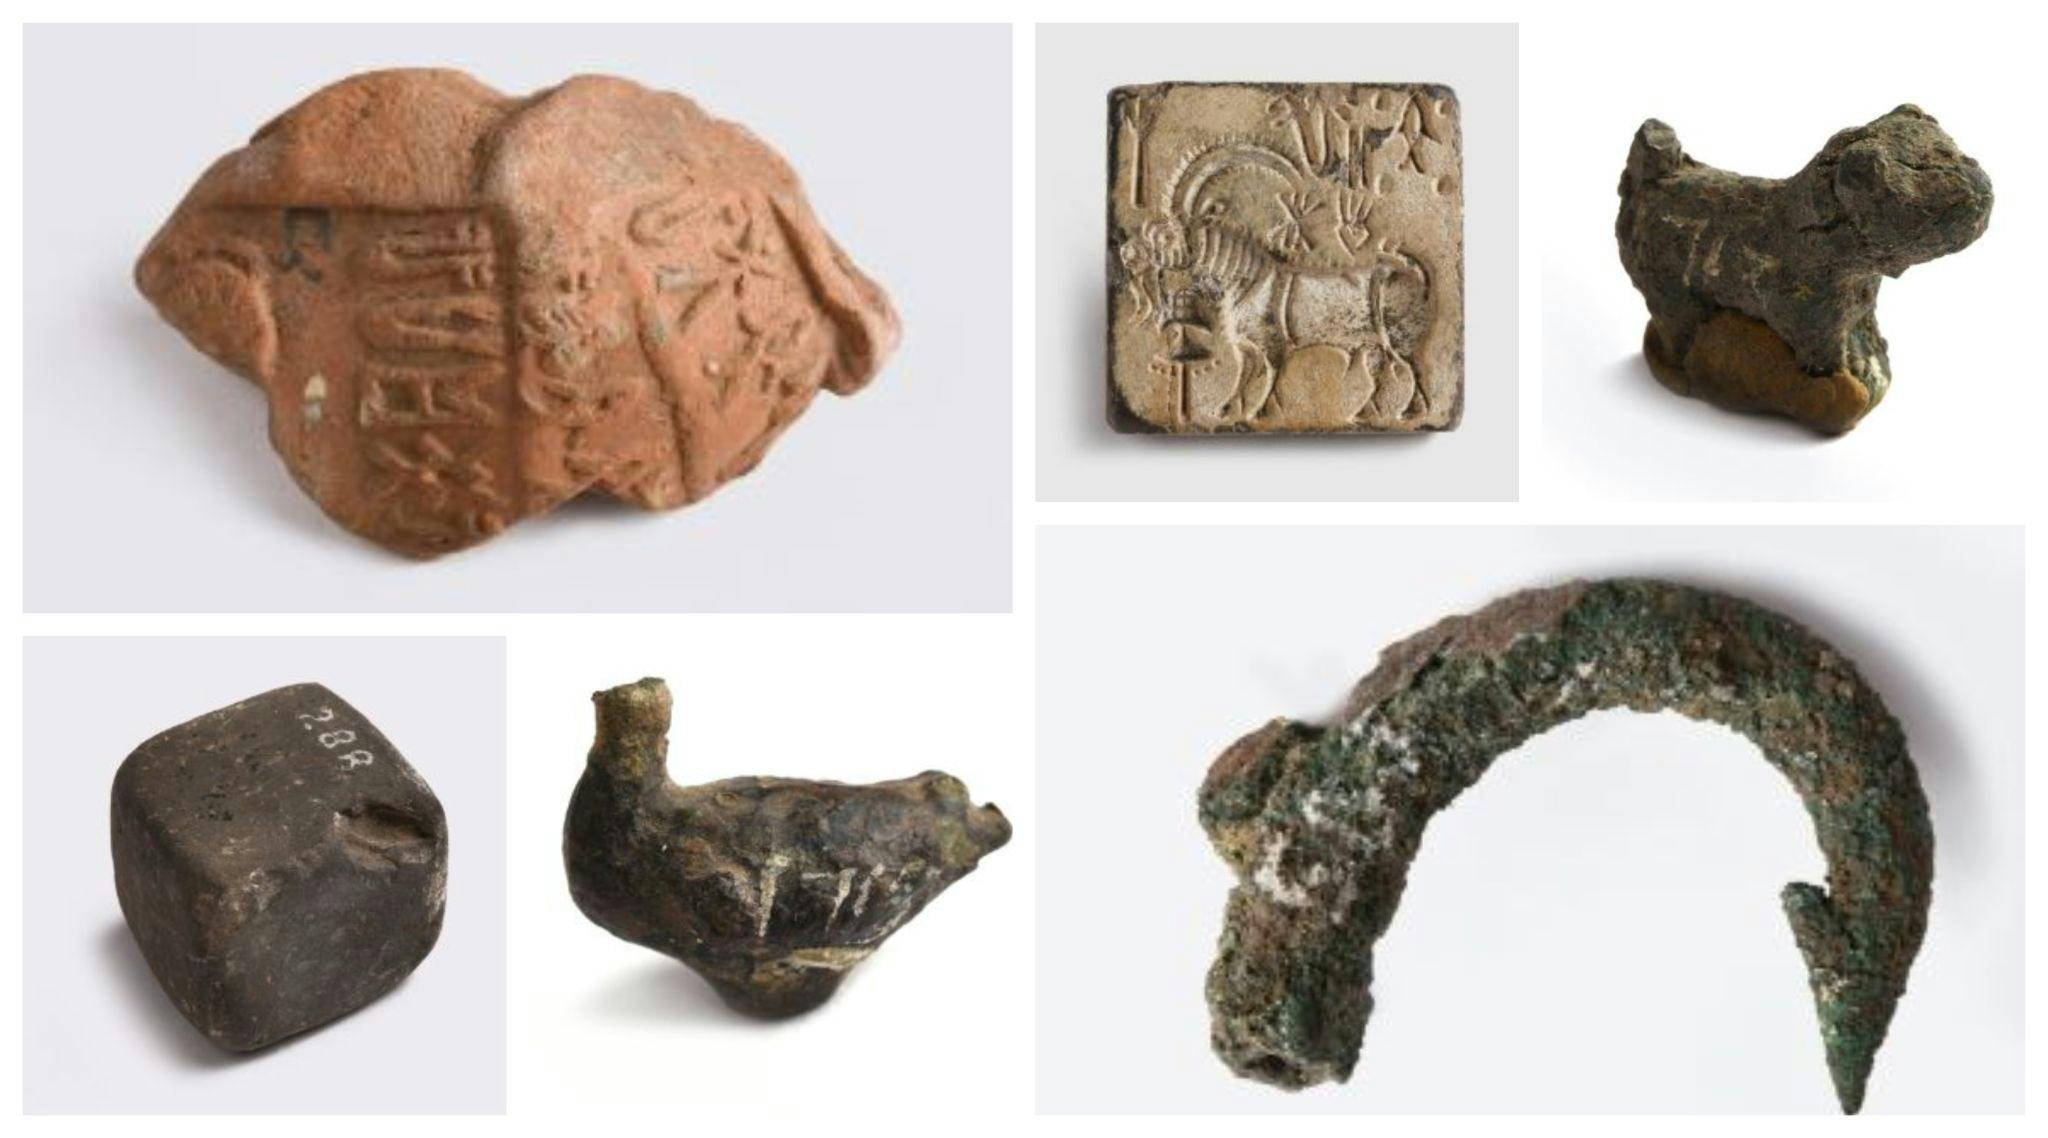 Artefacts from Lothal